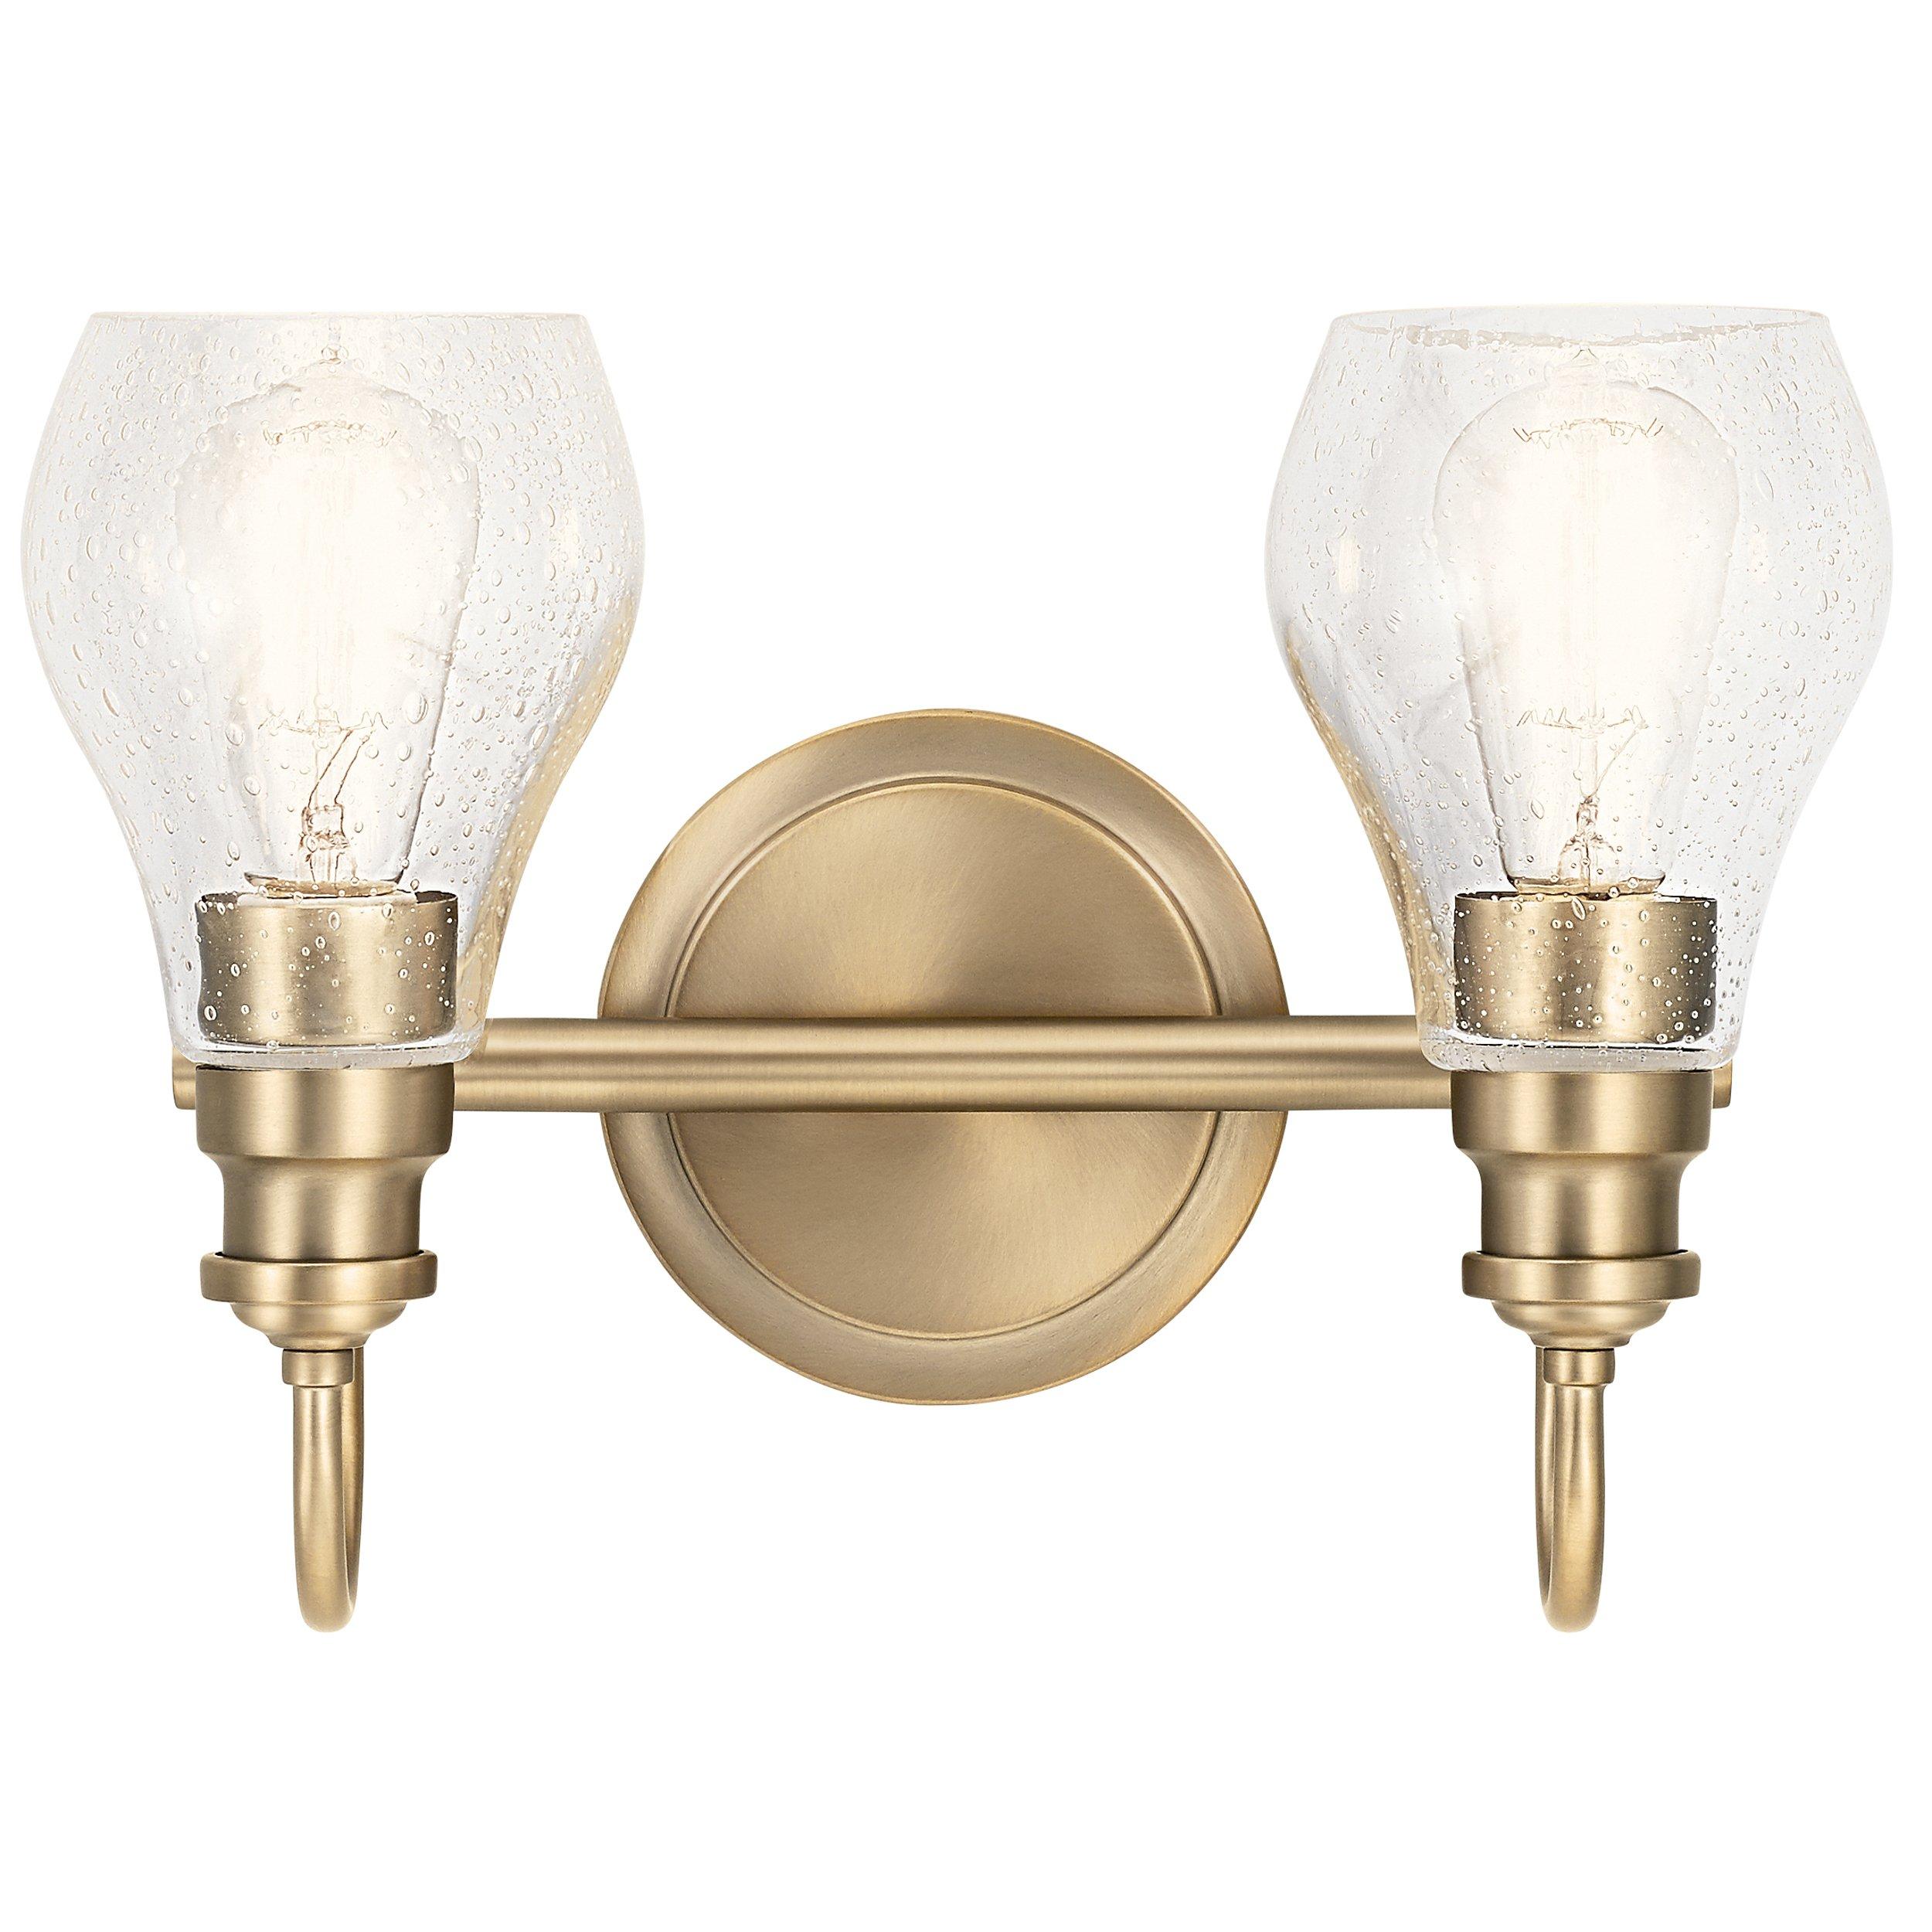 Greenbrier Classic Bronze Double Sconce